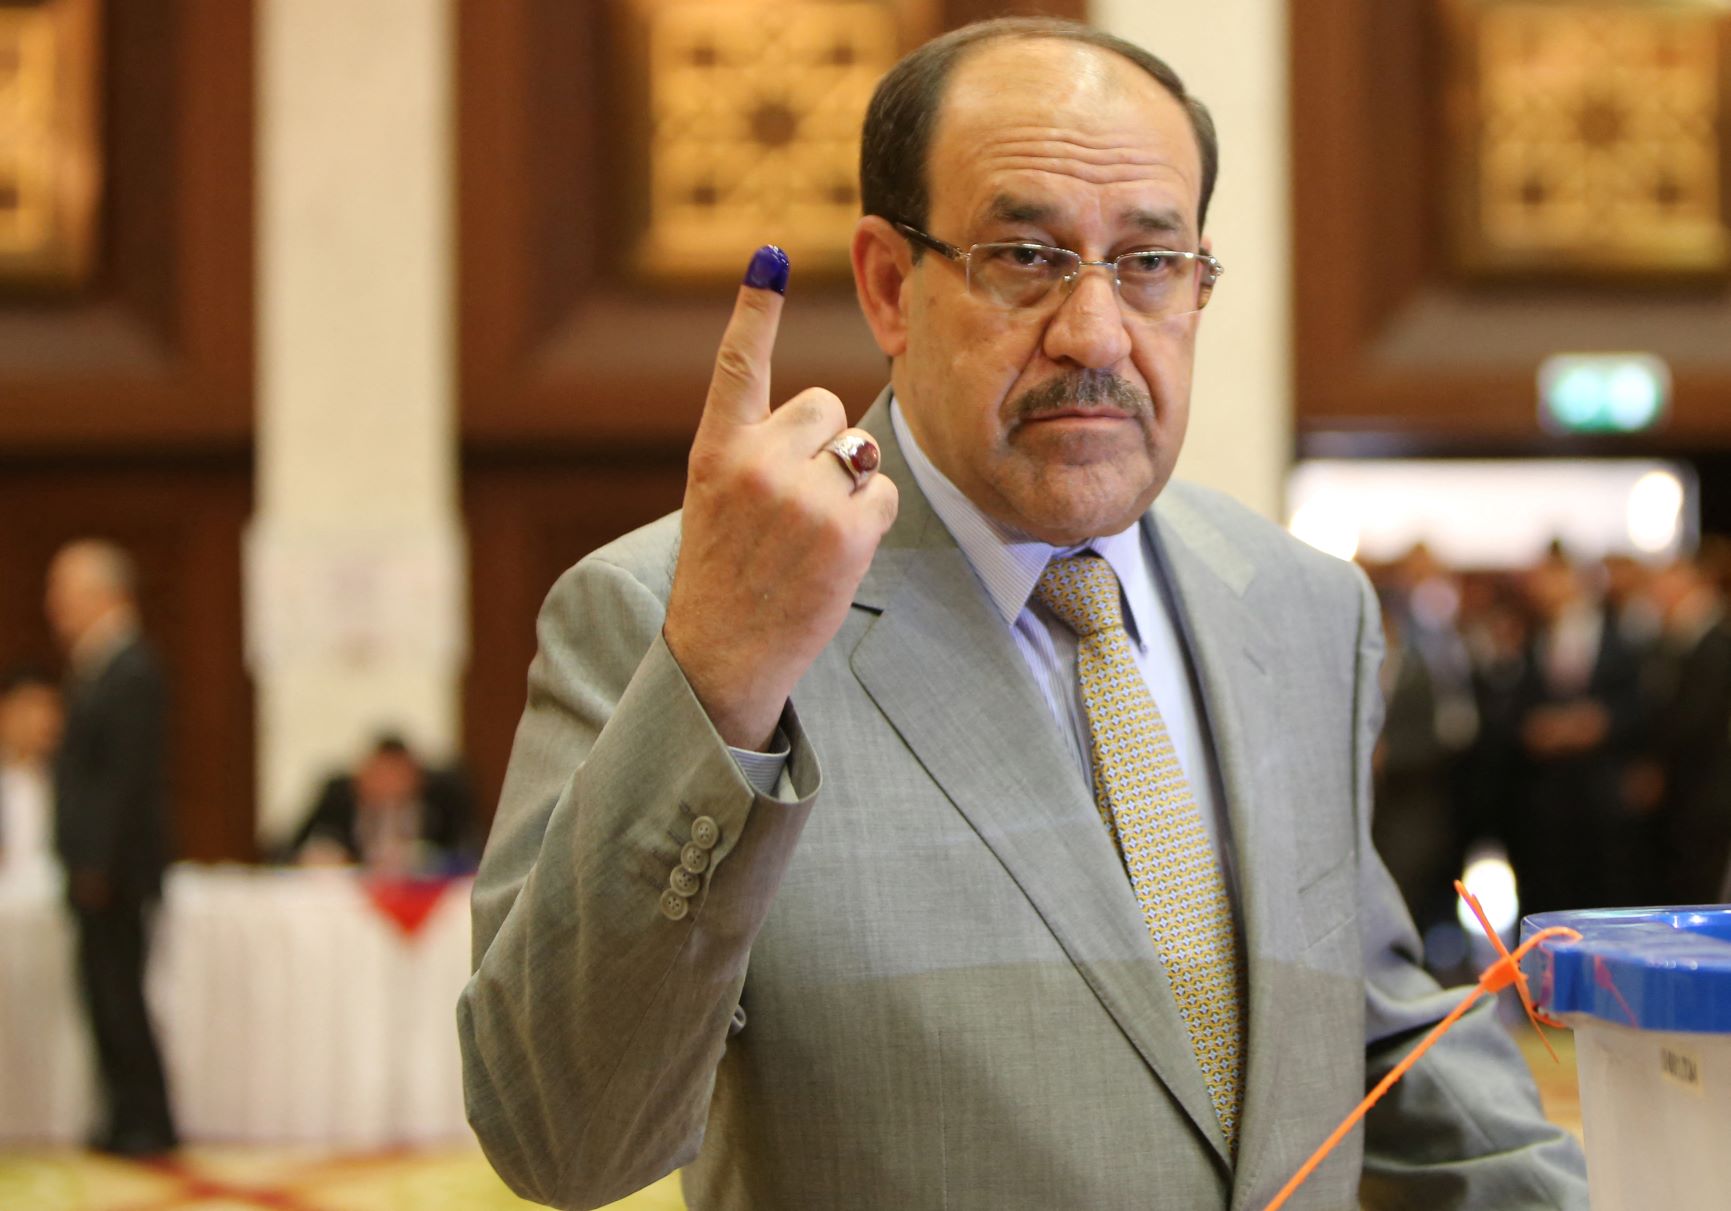 Iraqi Prime Minister Nuri al-Maliki shows his ink-stained finger after casting his vote in Iraqi elections in 2014 (AFP)